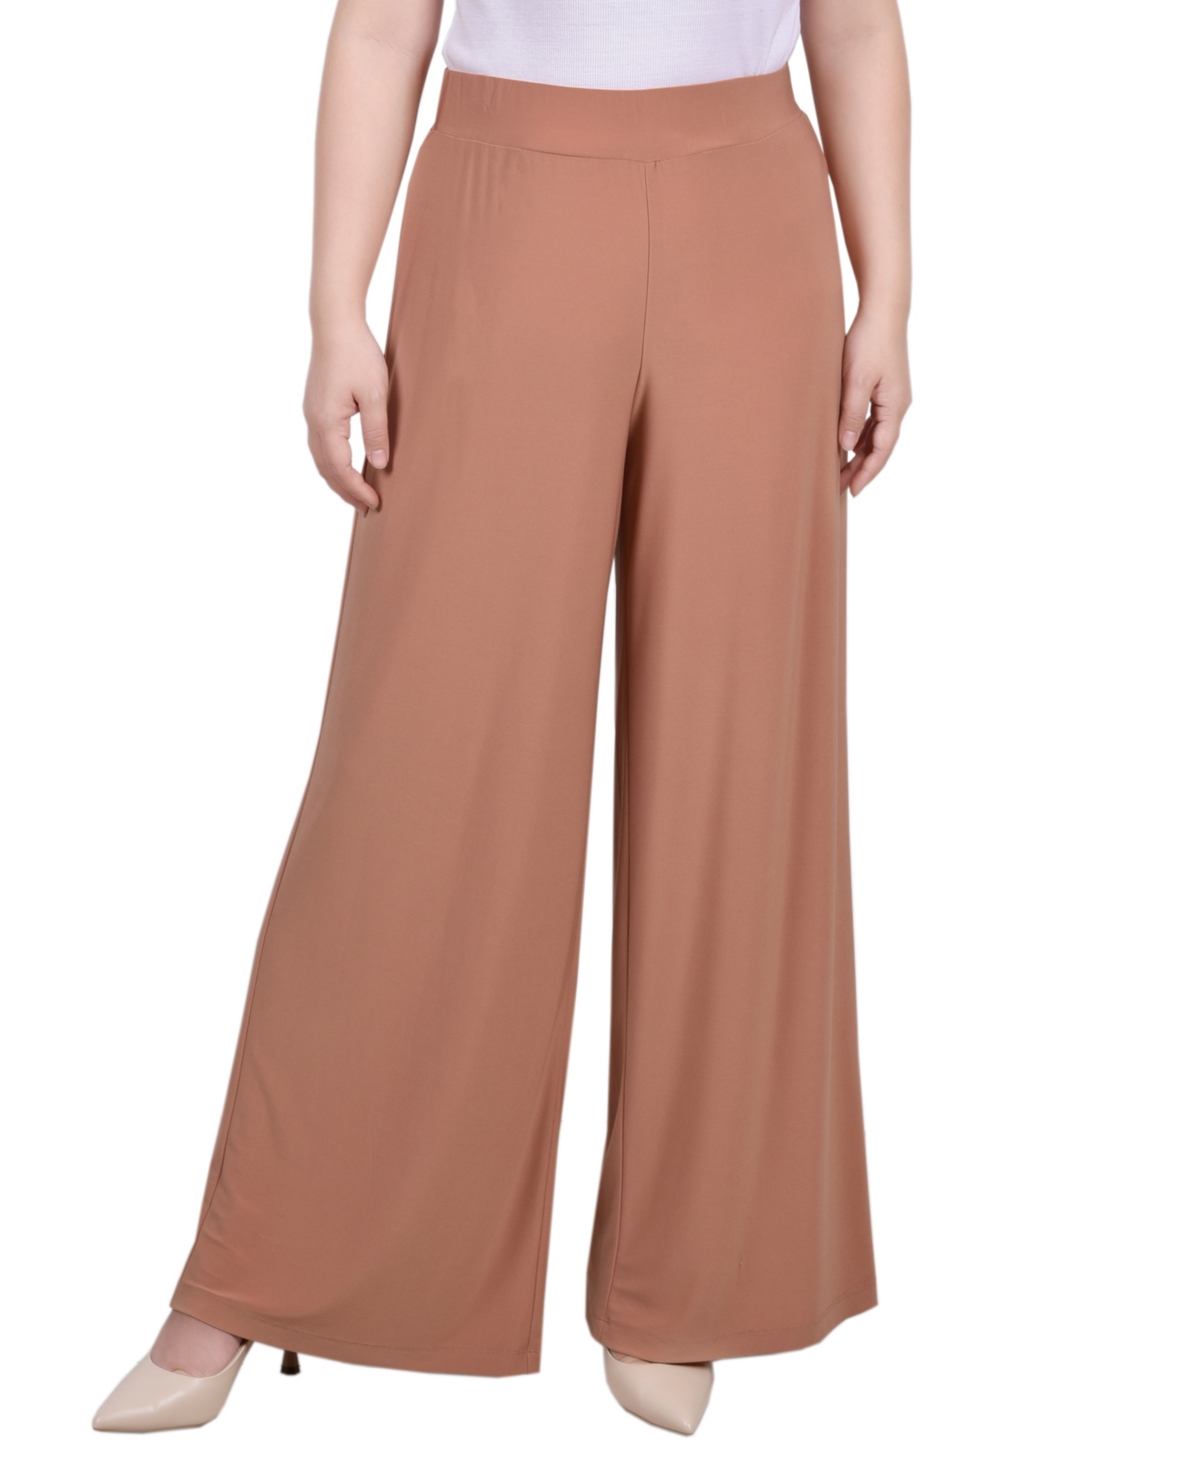 NY COLLECTION PETITE MID RISE PULL ON WIDE-LEG PALAZZO PANT, IN PETITE & PETITE SHORT